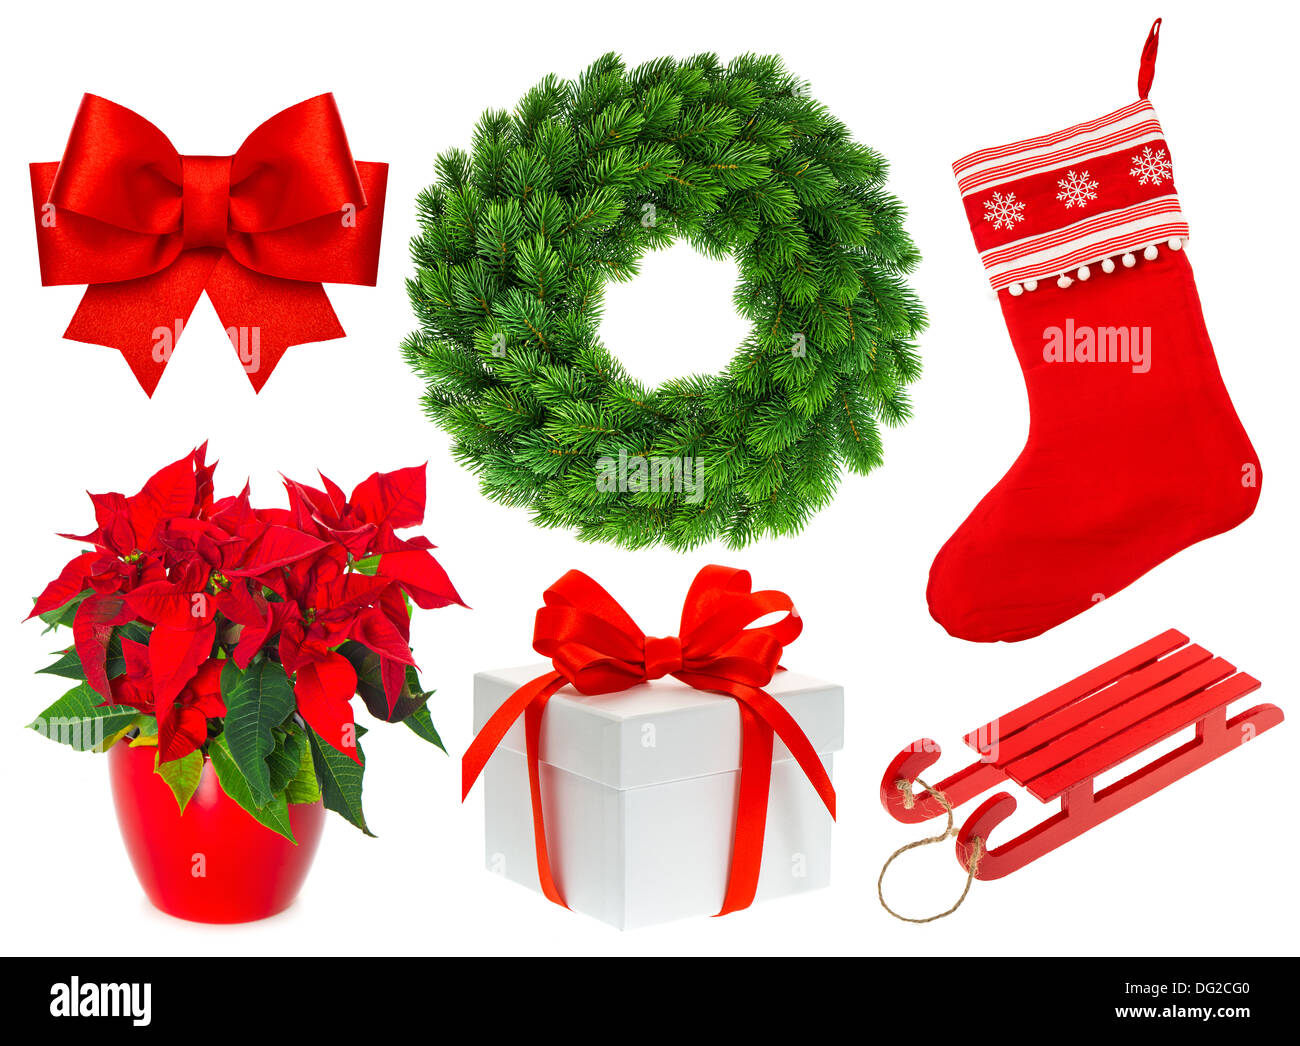 Christmas collection isolated on white background. Set with stocking, gifts, wreath, ribbon bow Stock Photo